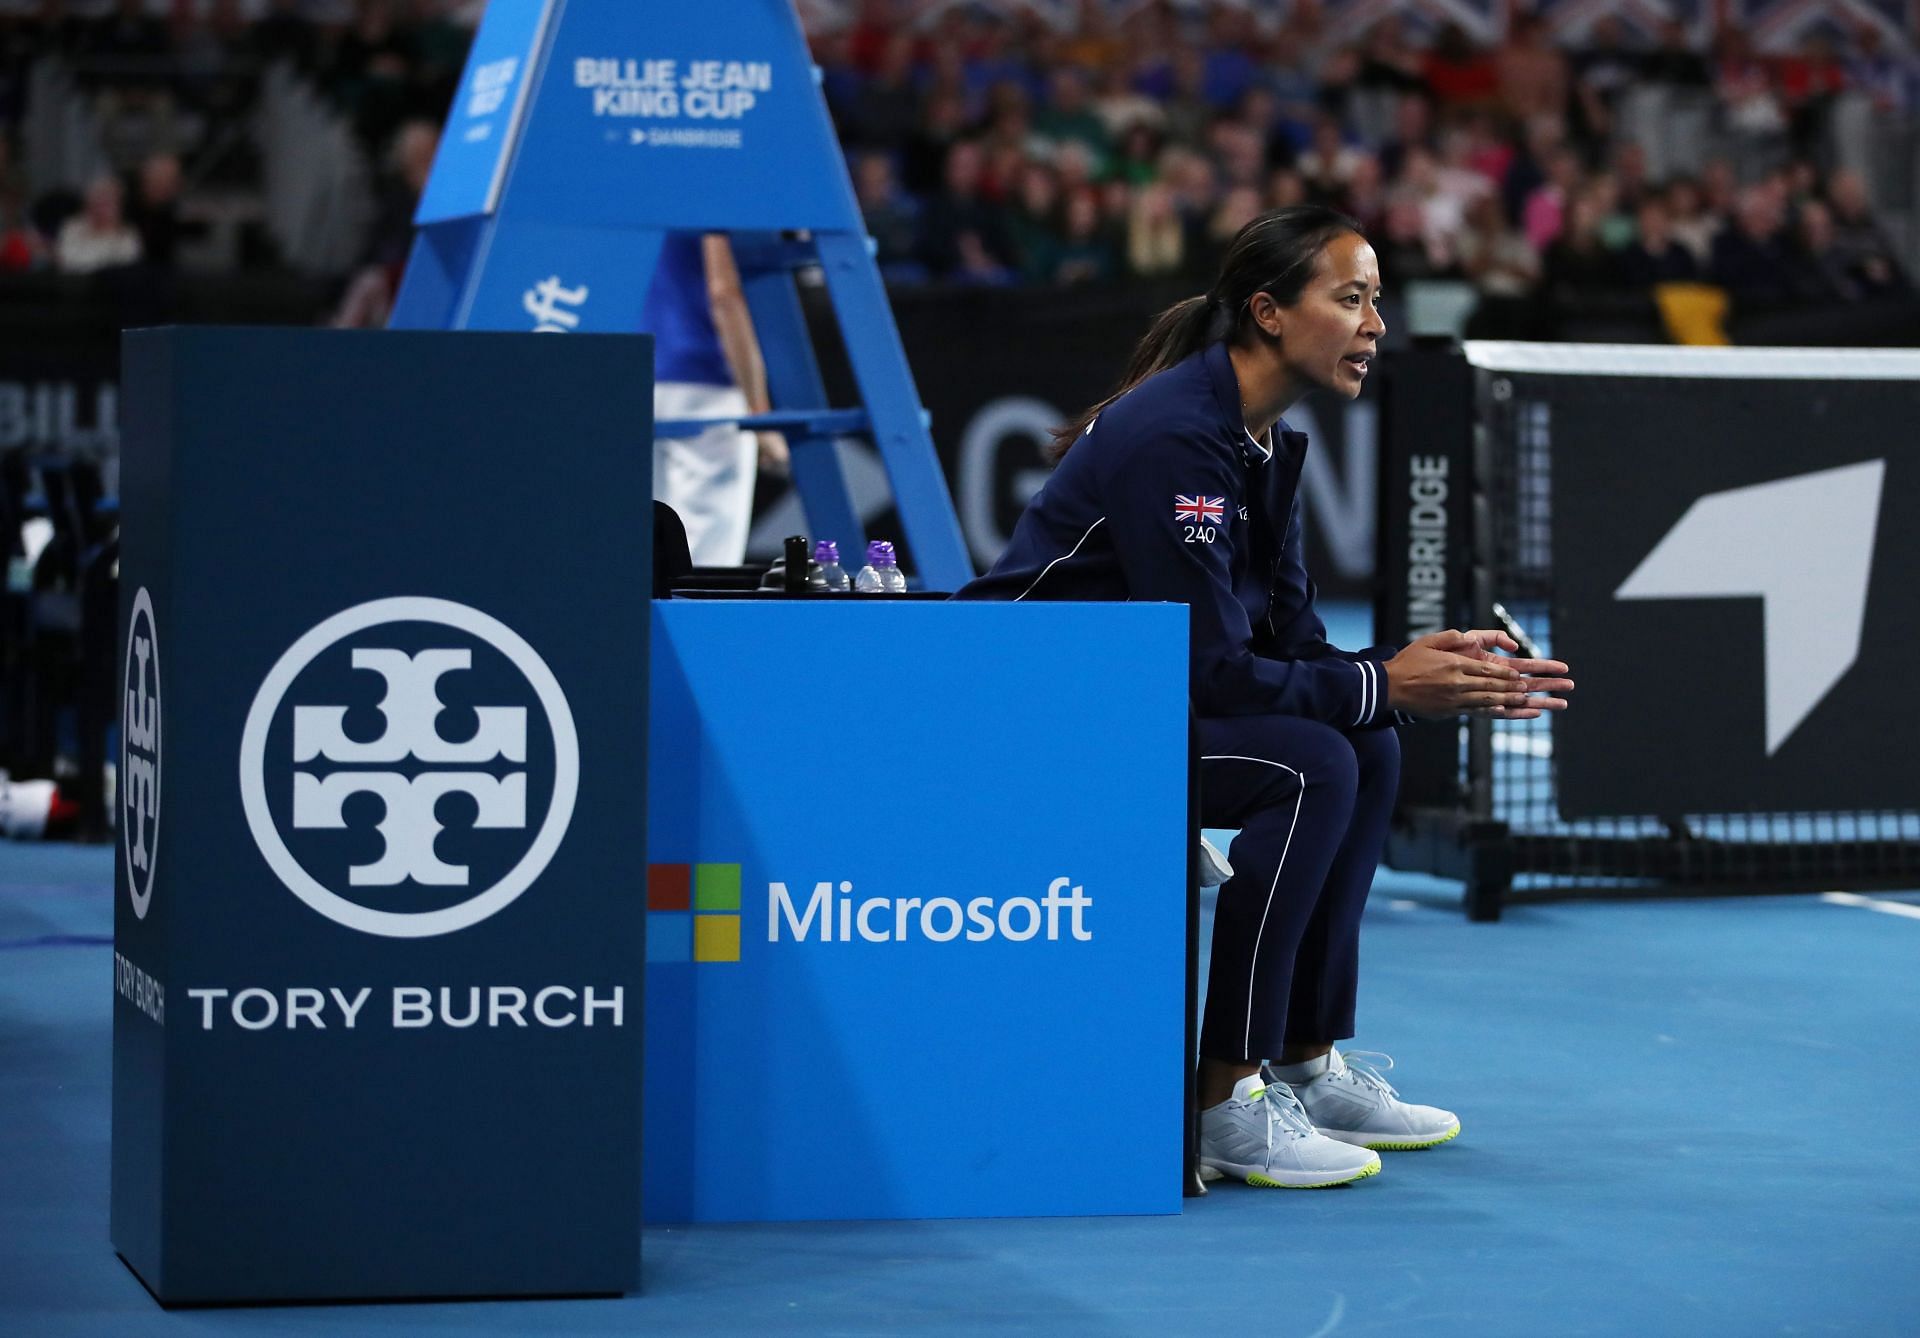 Anne Keothavong reacts during a Billie Jean King Cup Qualifier match in Coventry, England.